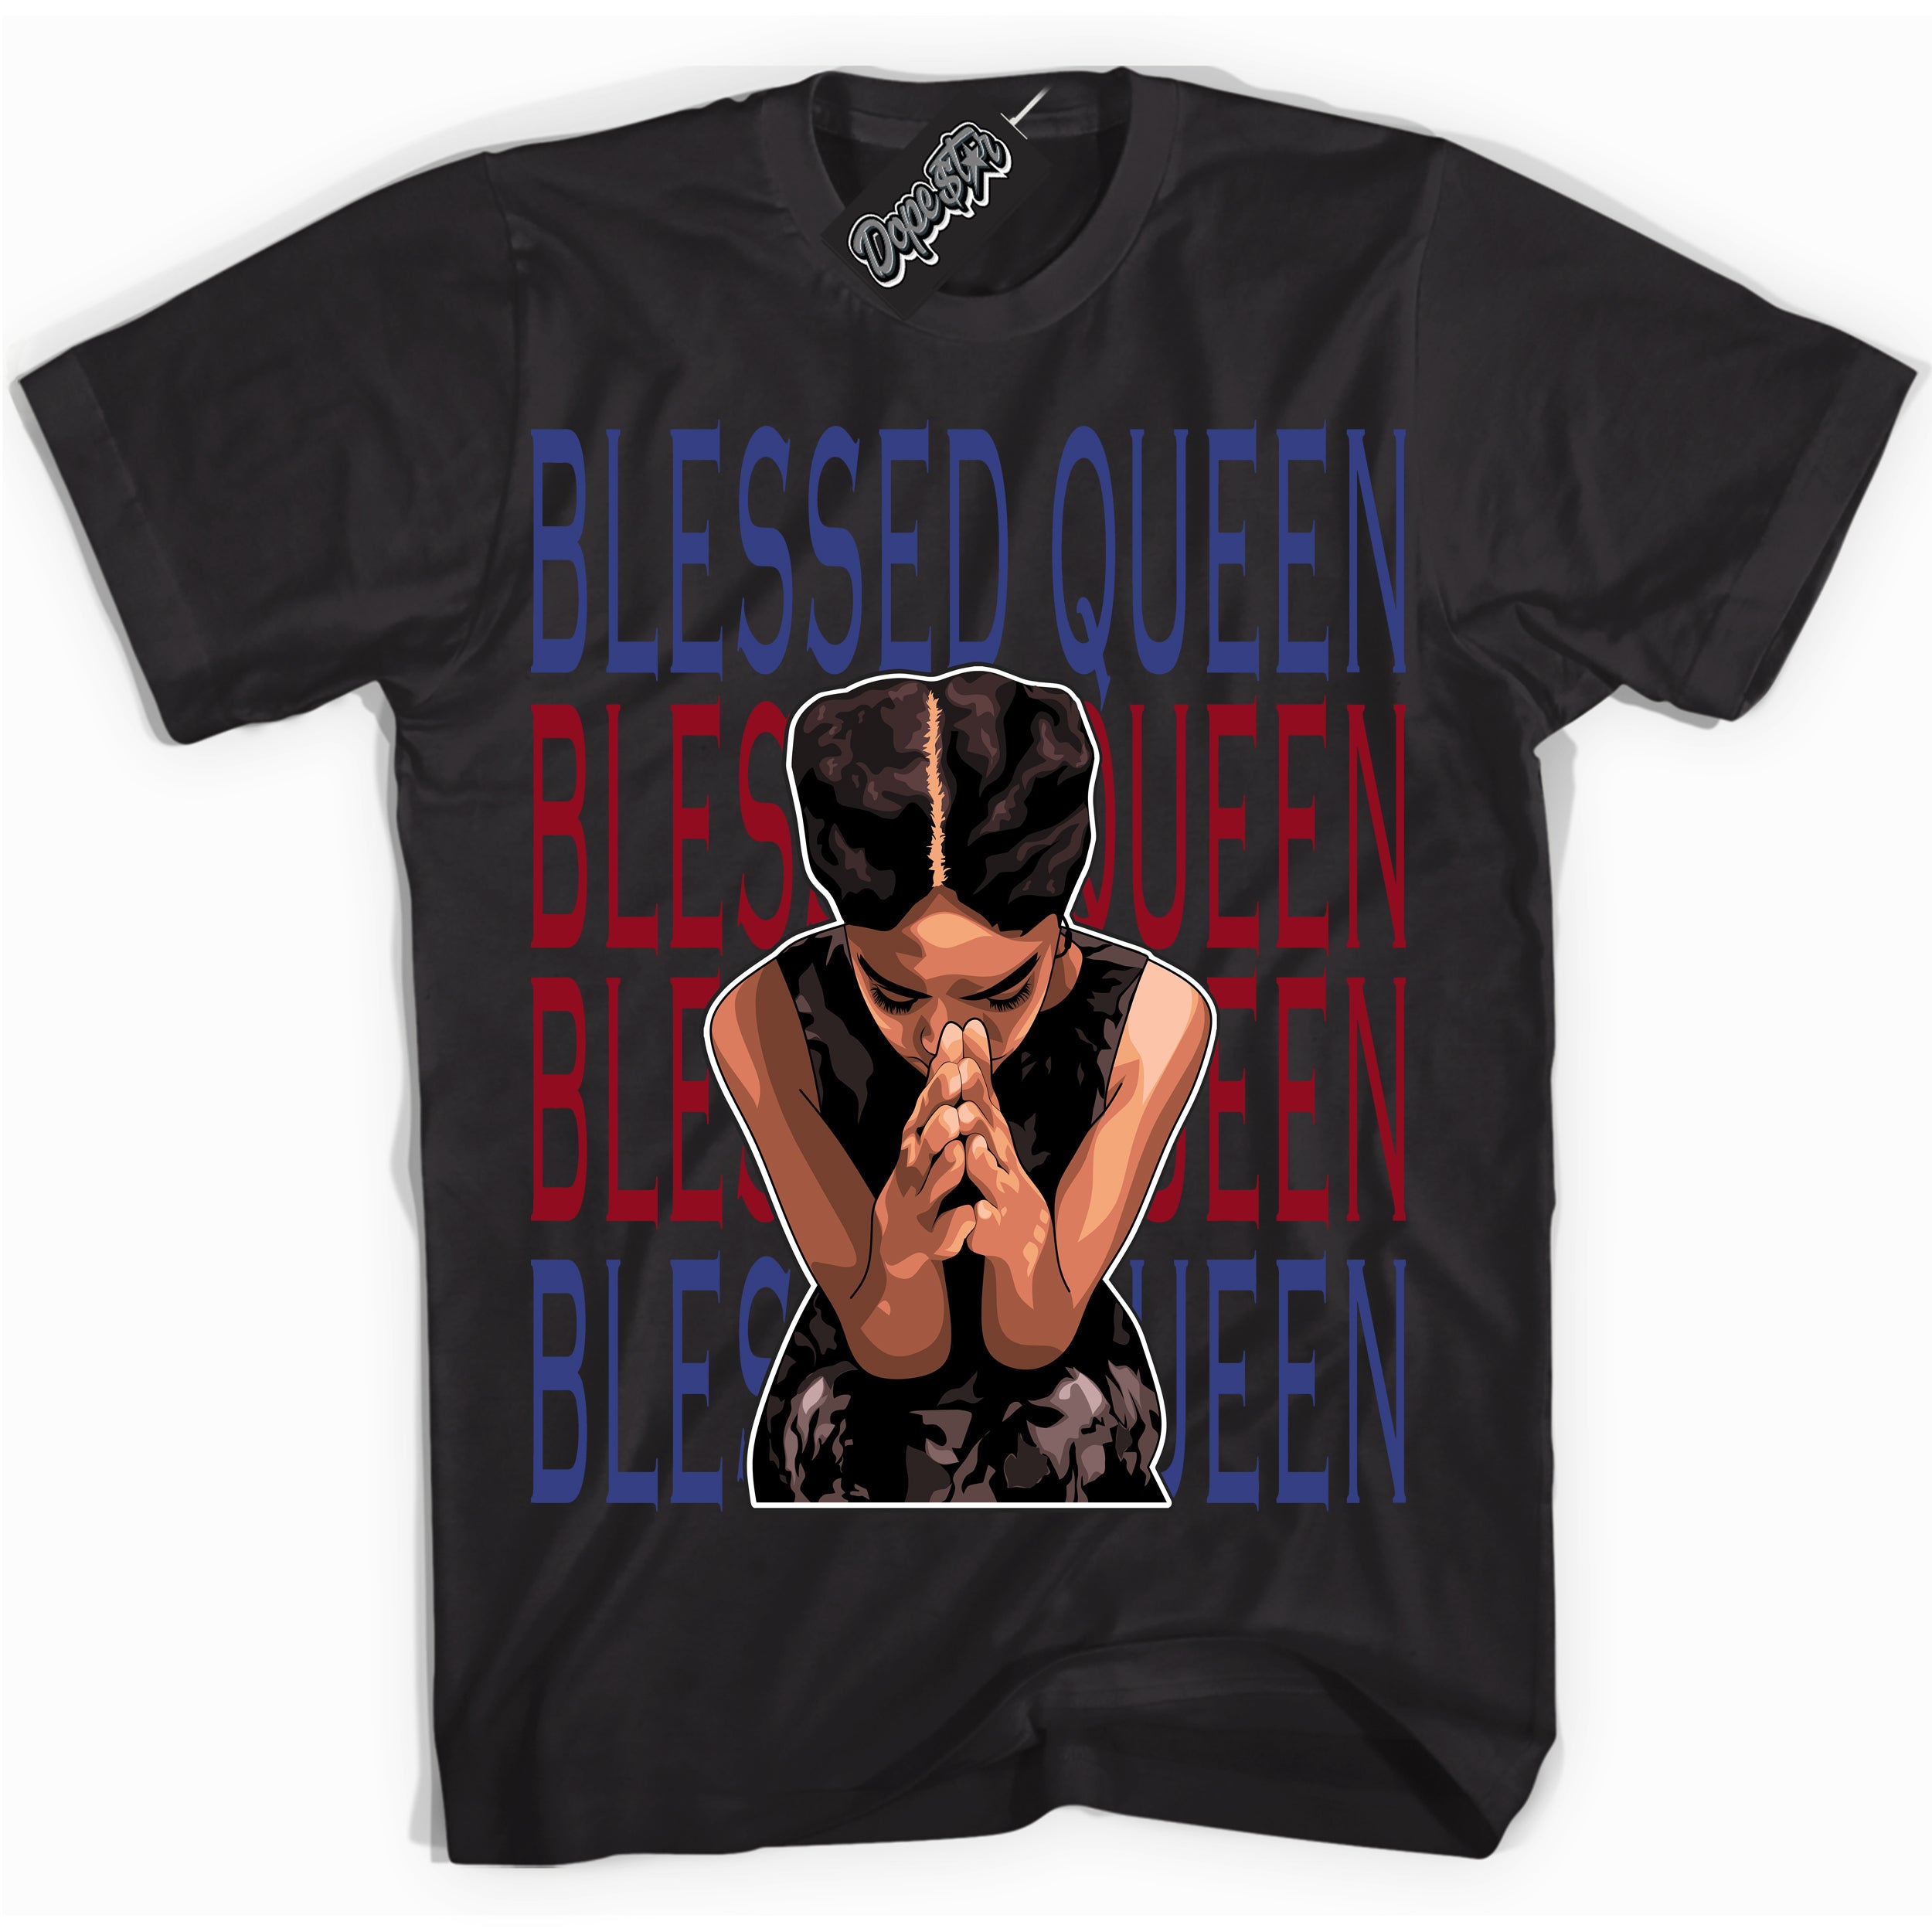 Cool Black Shirt with “ Blessed Queen ” design that perfectly matches Playoffs 8s Sneakers.